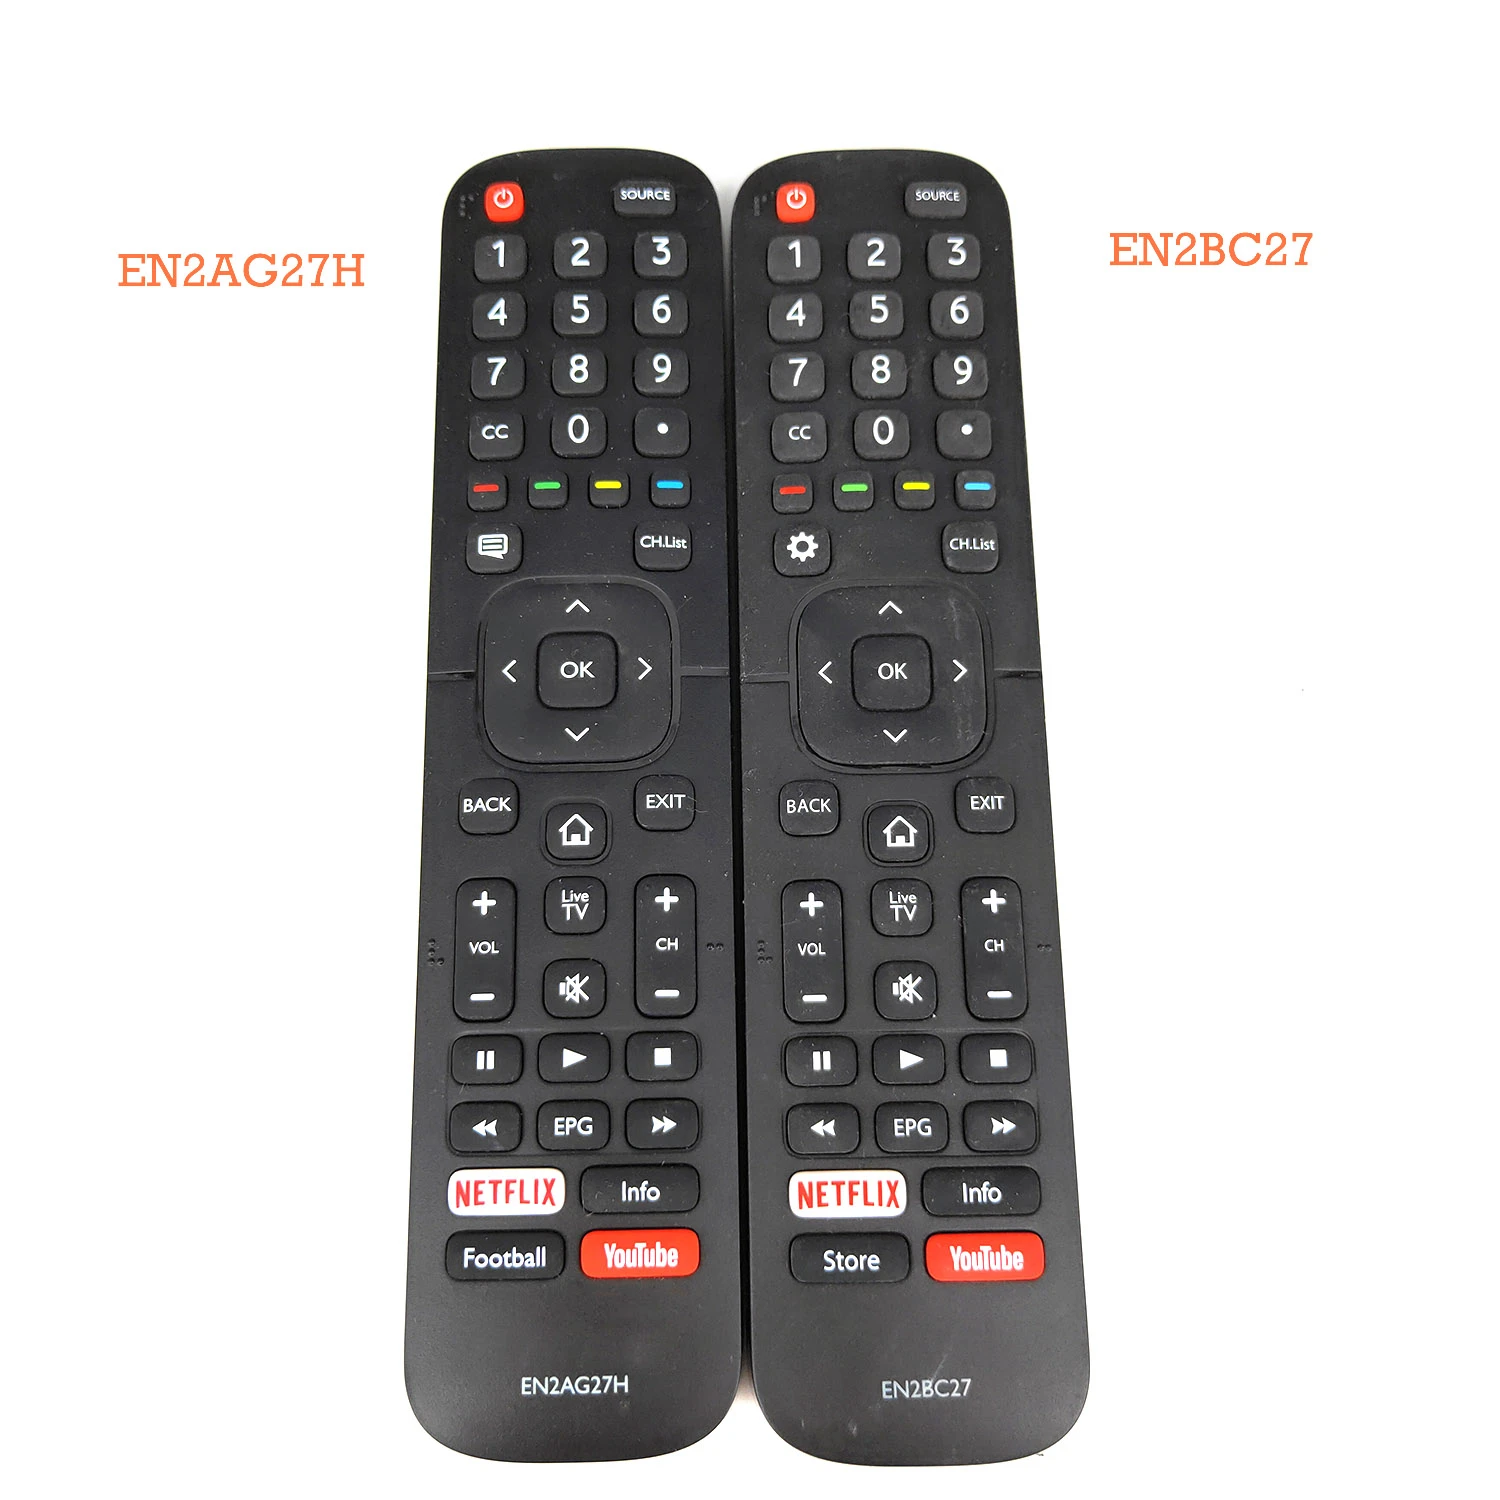 New En2ag27h Enbc27 For Hisense Led Smart Tv Remote Control With Netflix Youtube Apps Remote Controls Aliexpress